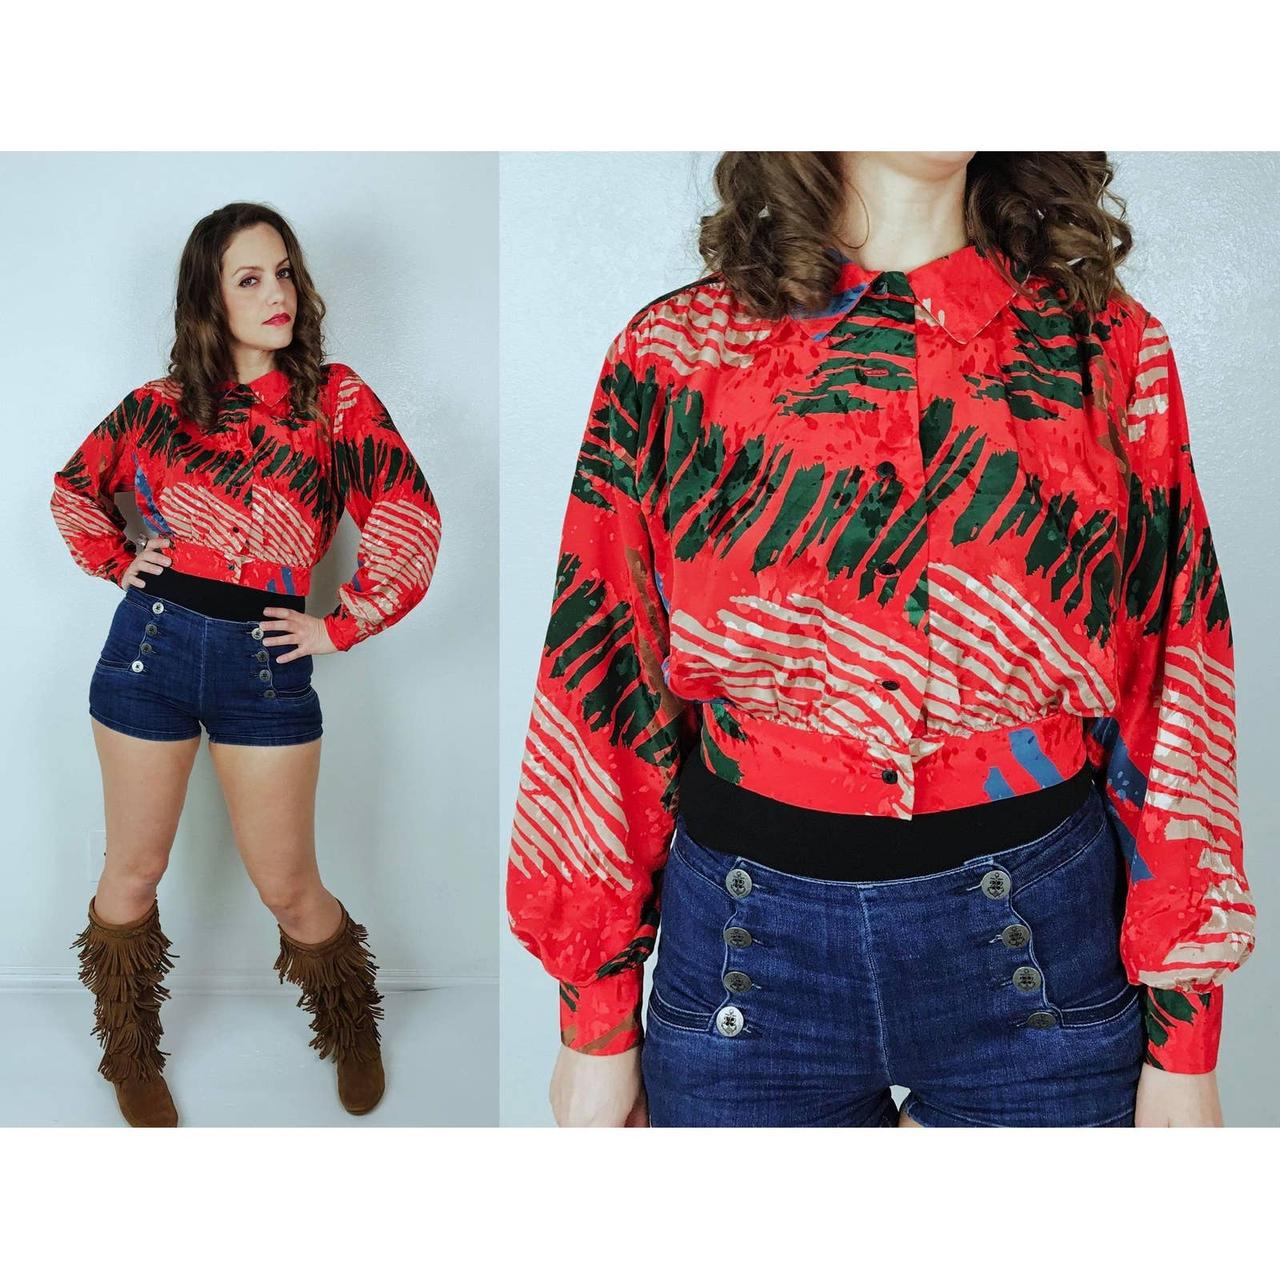 Stellar 80s blouse! Fire red blouse features a...